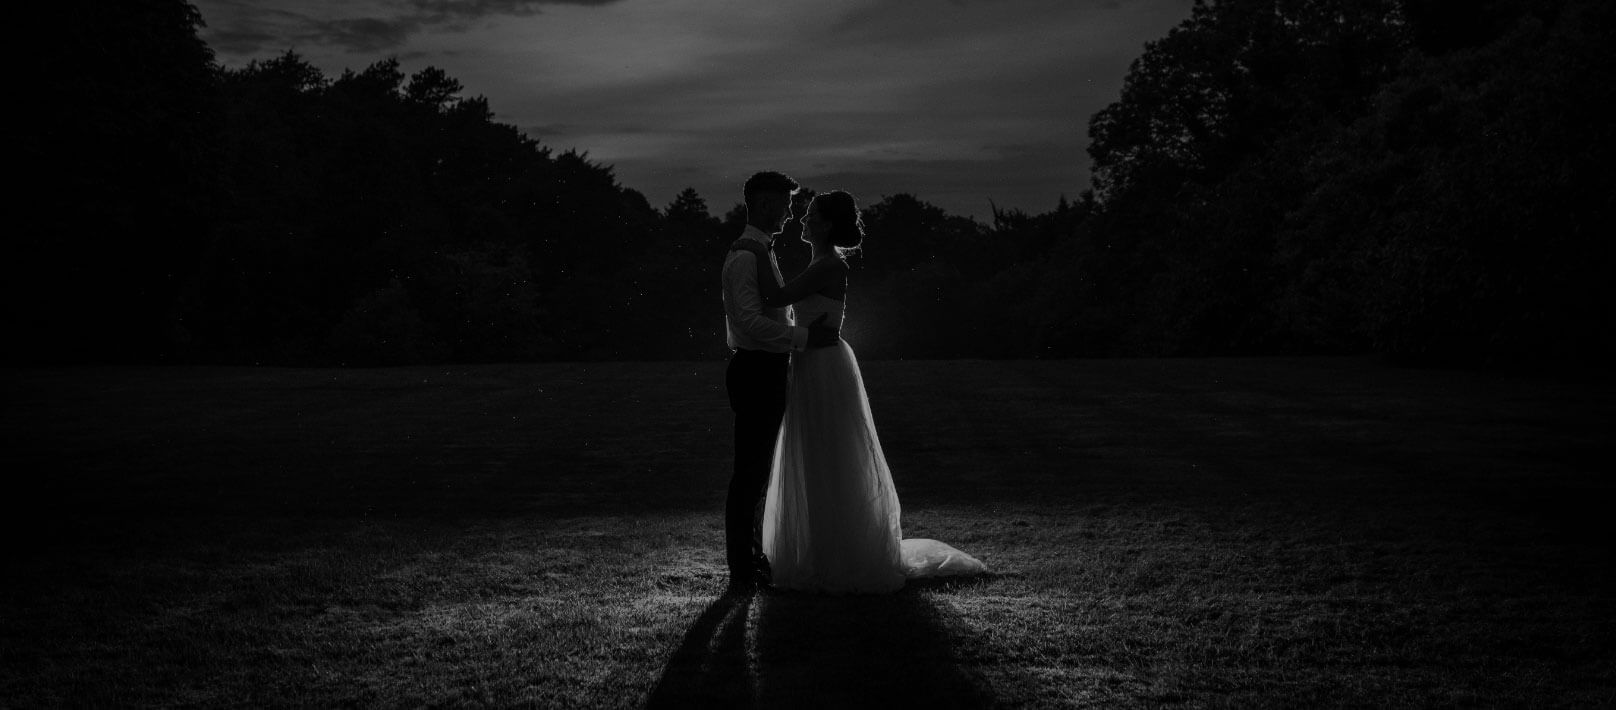 Elegant photo featuring a Bride & Groom on our lawn - Black & White